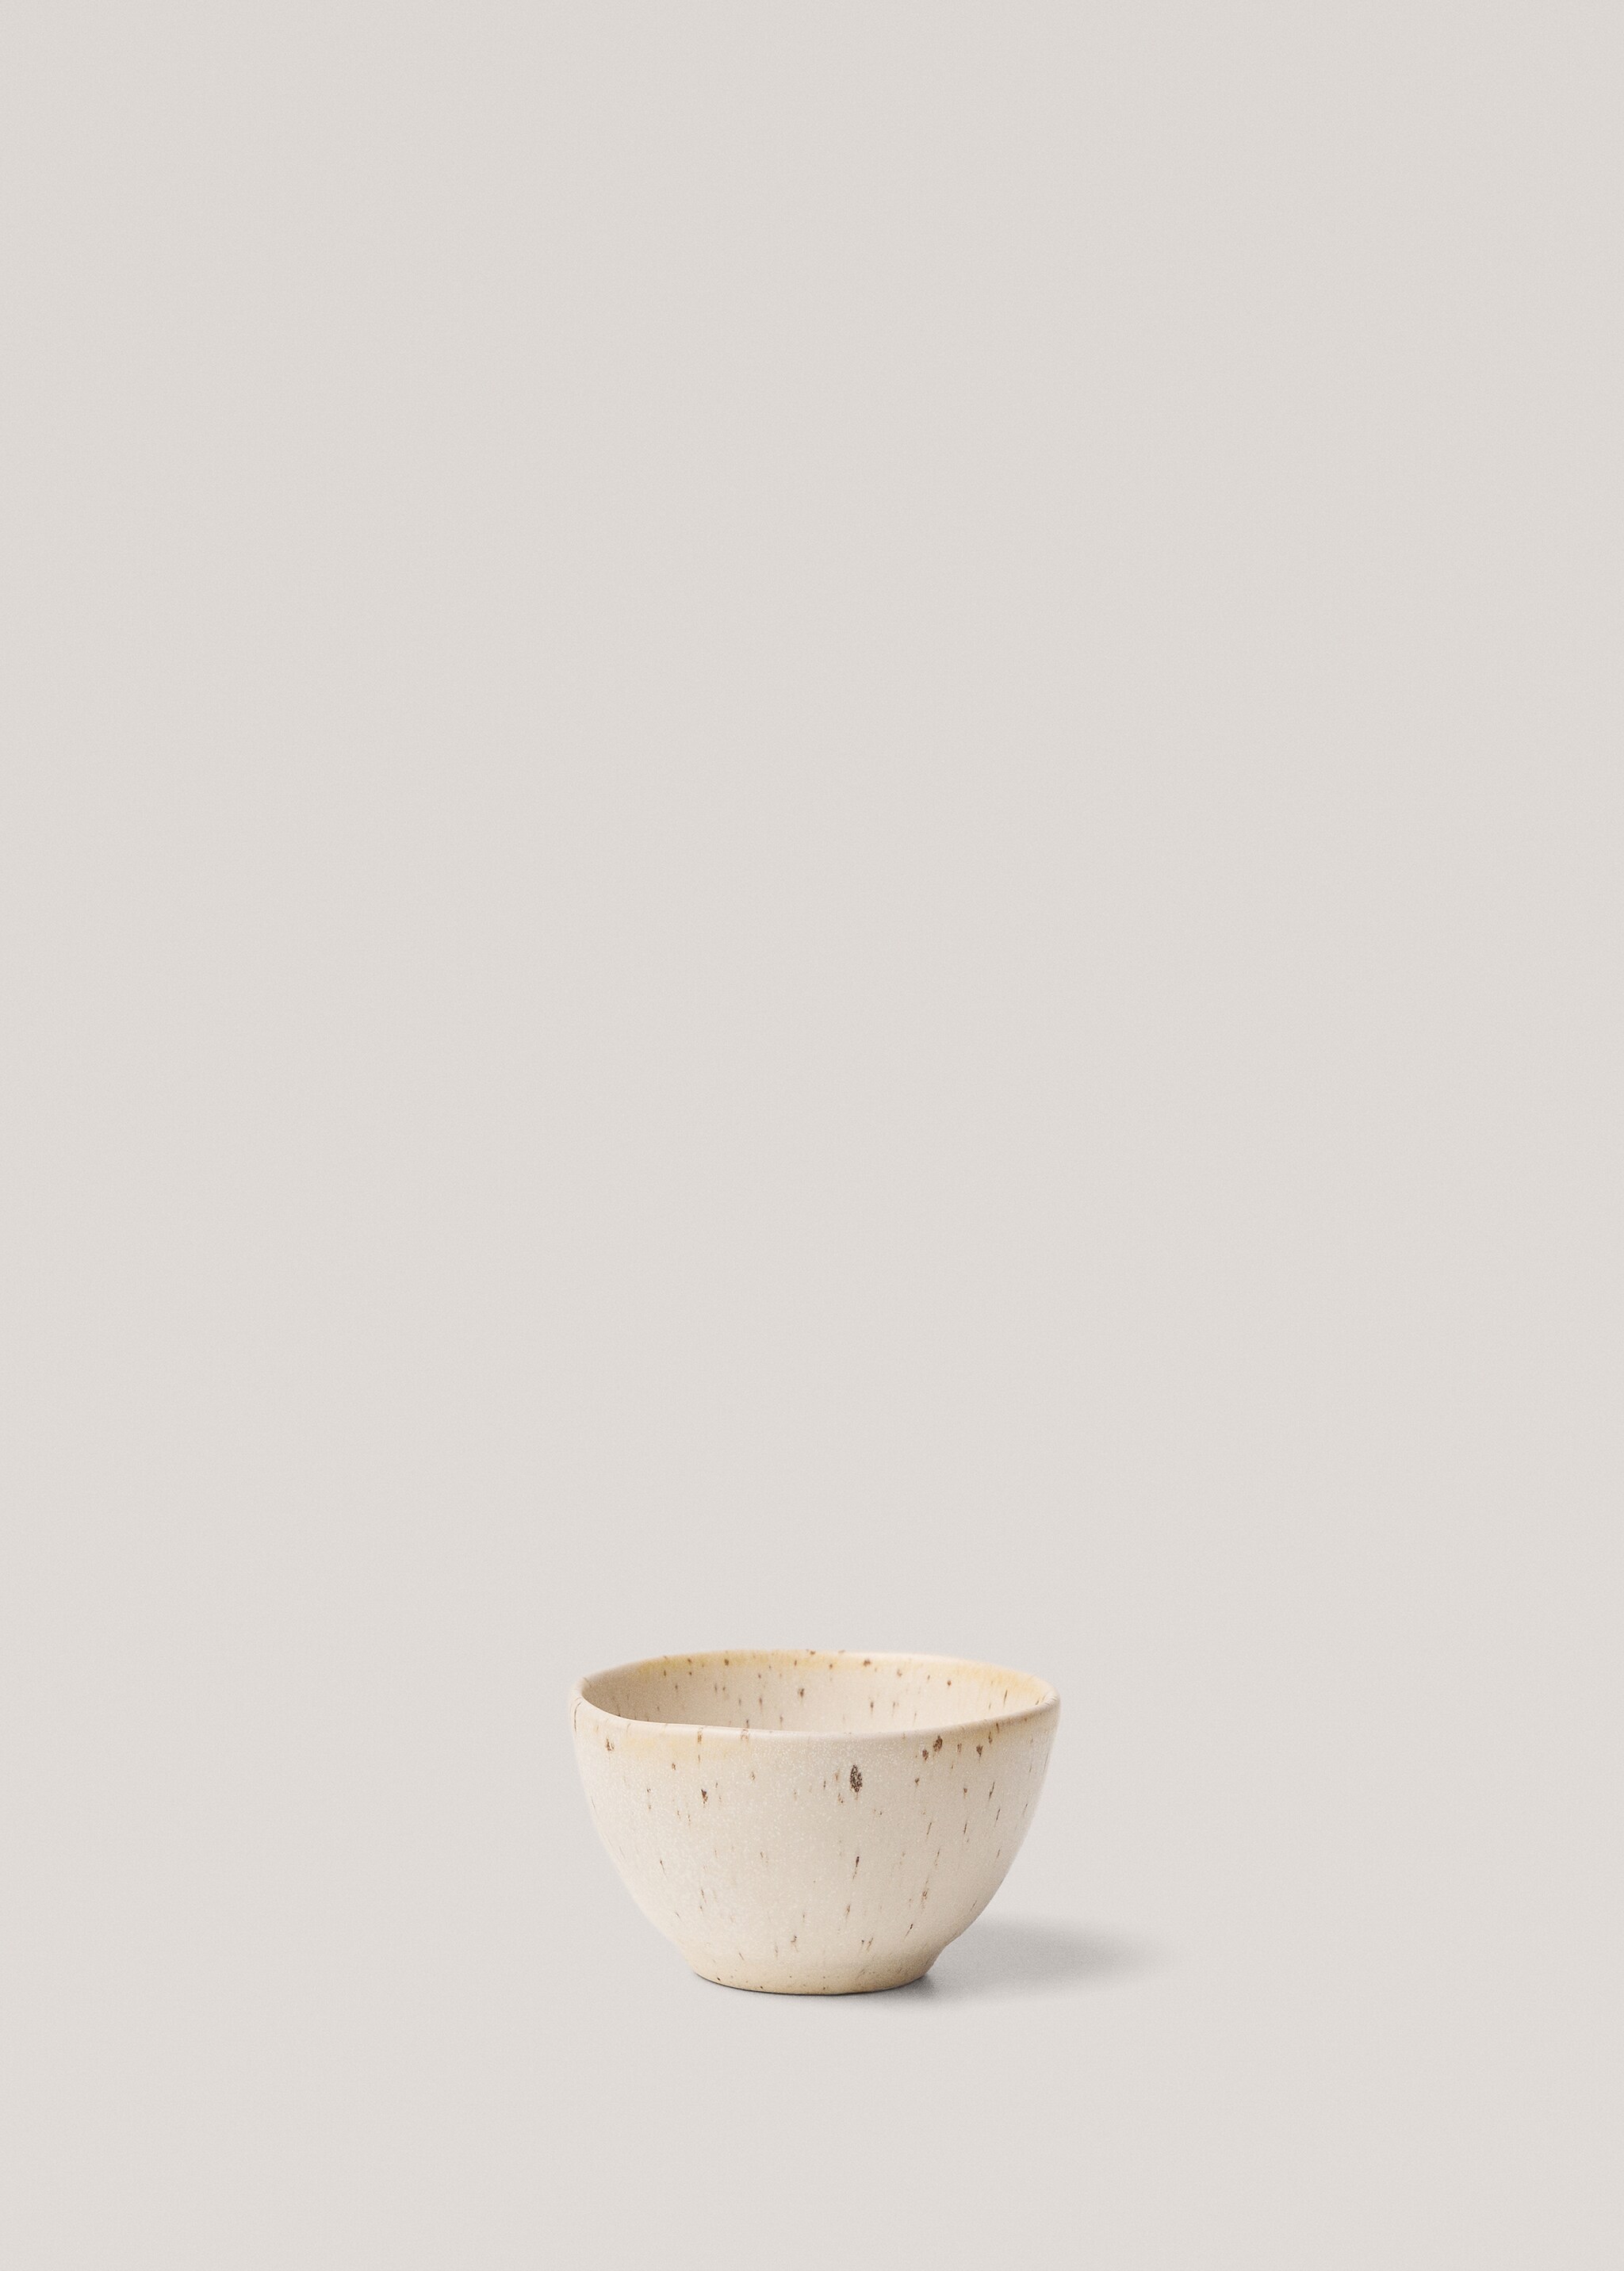 Aged stoneware bowl - Article without model